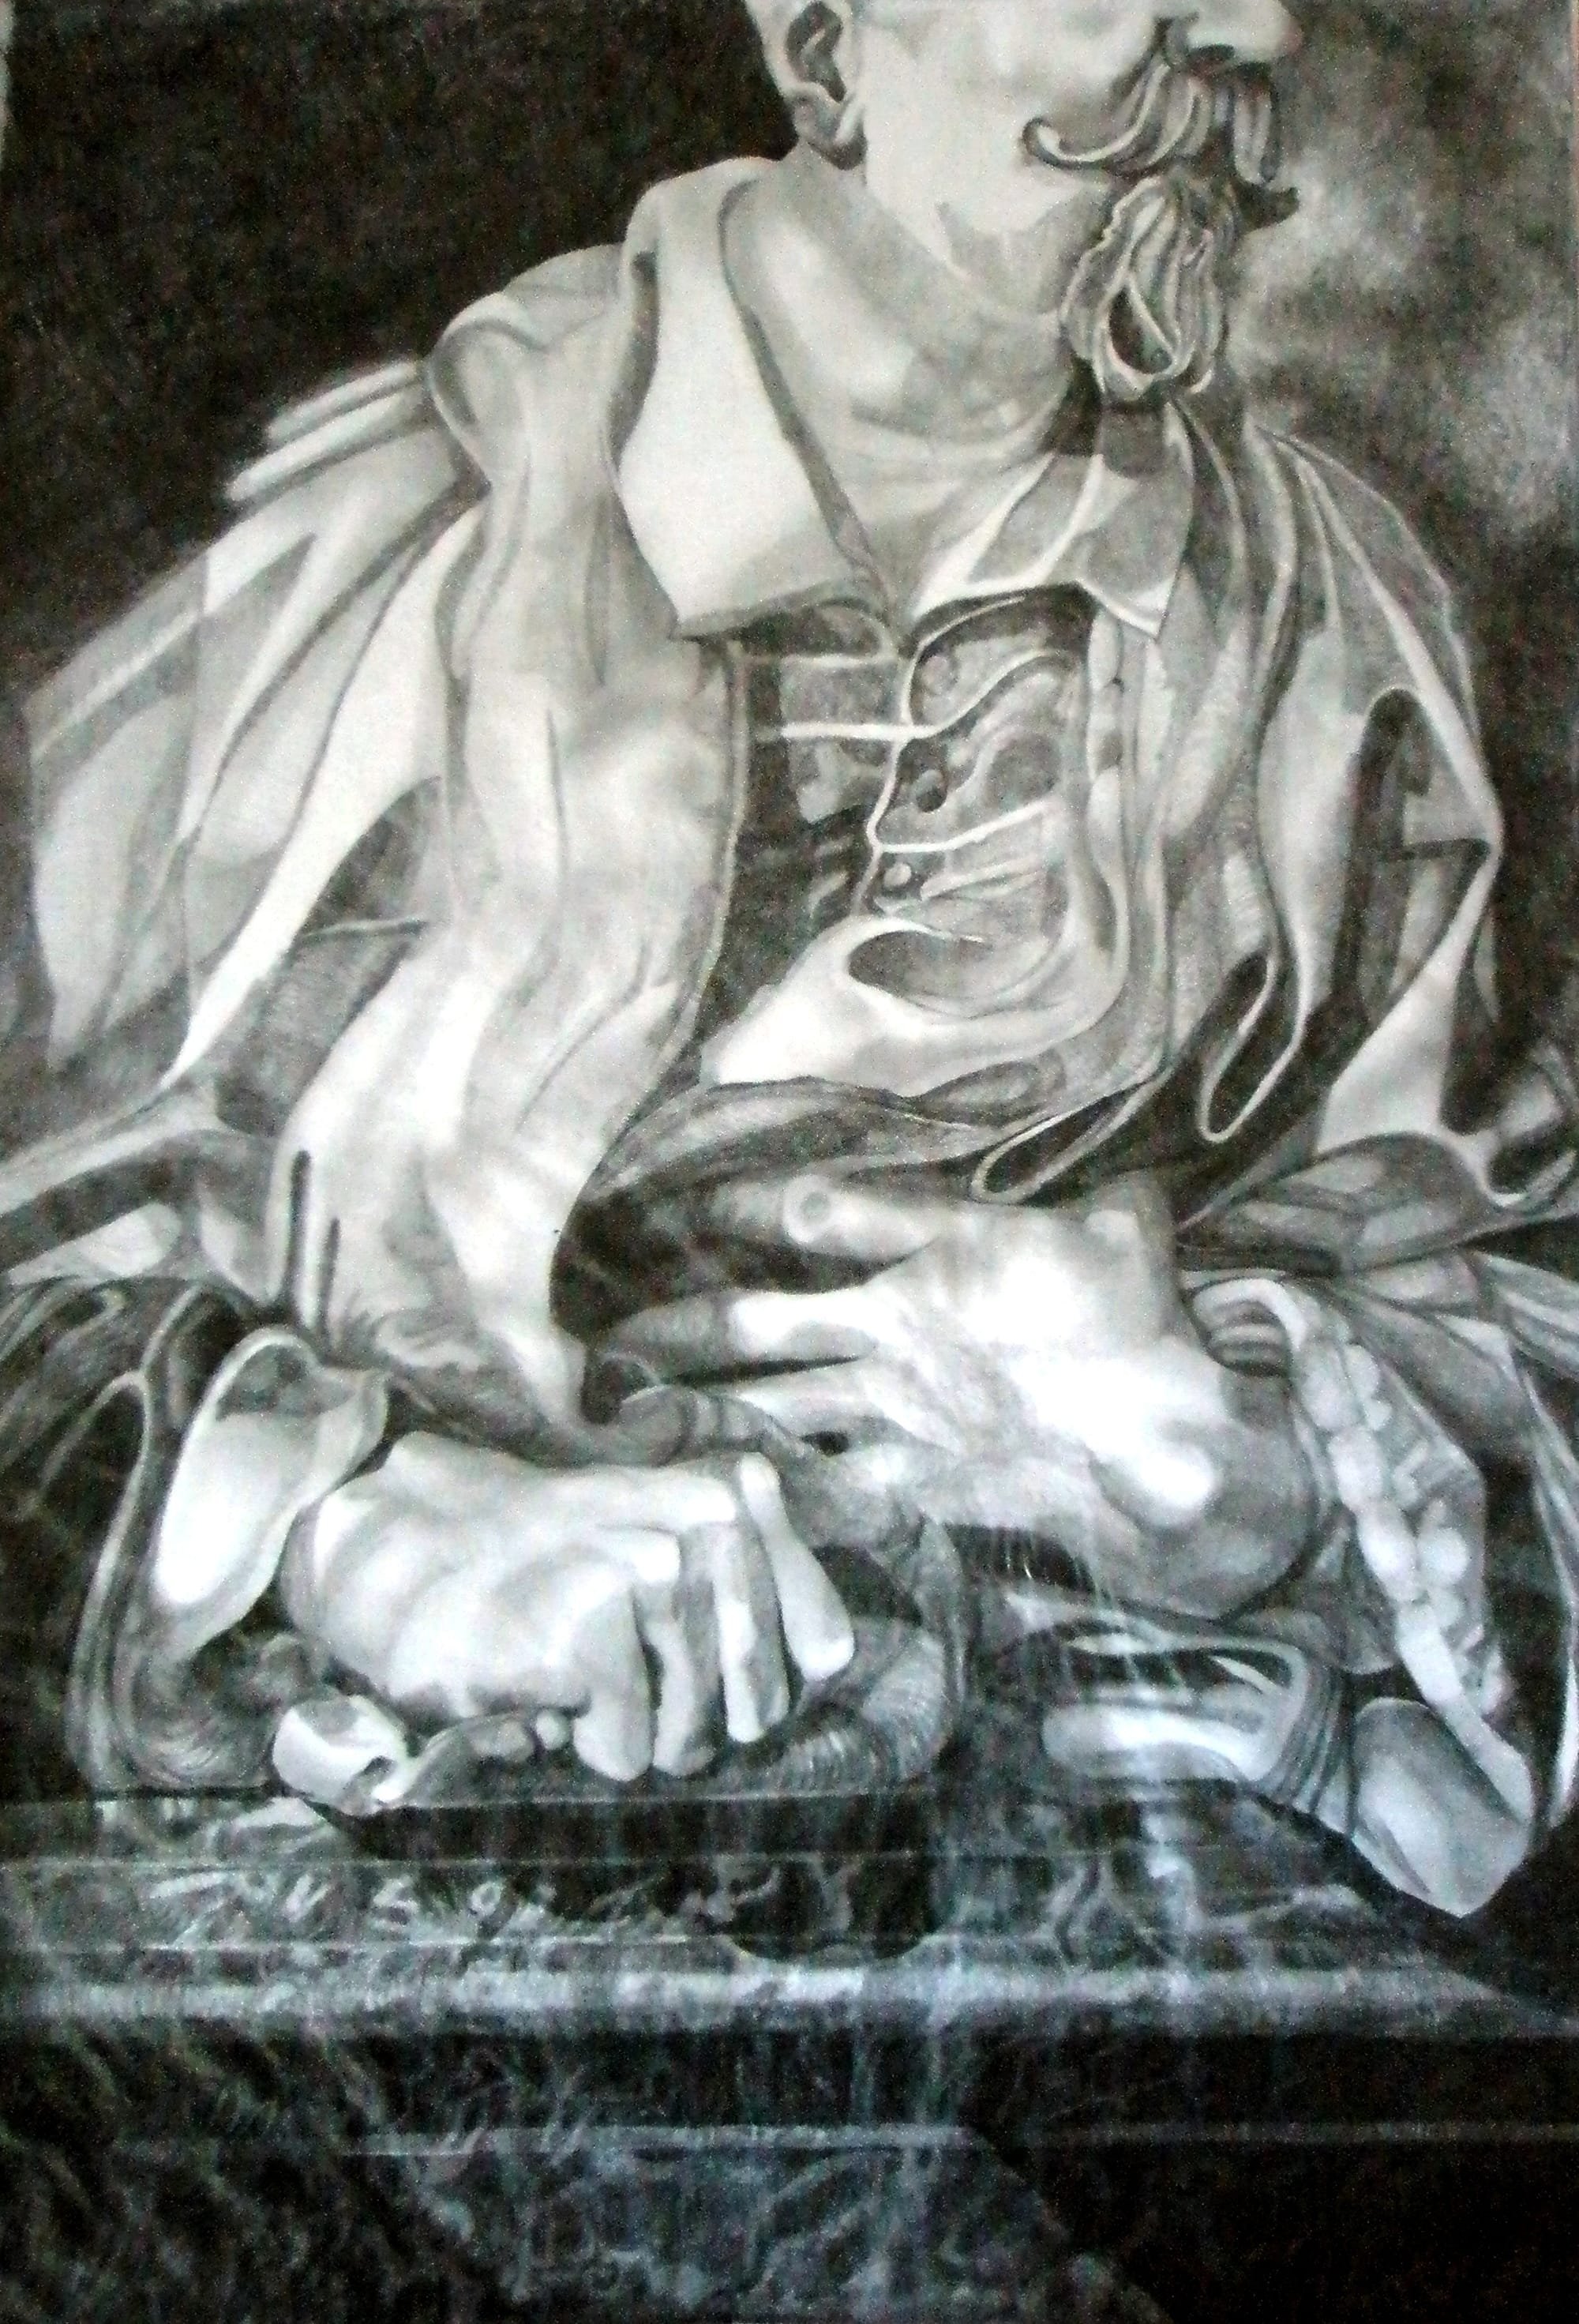 Pencil and Tissue paper study, 420 x 600mms, included in a solo exhibition in Rome, Italy